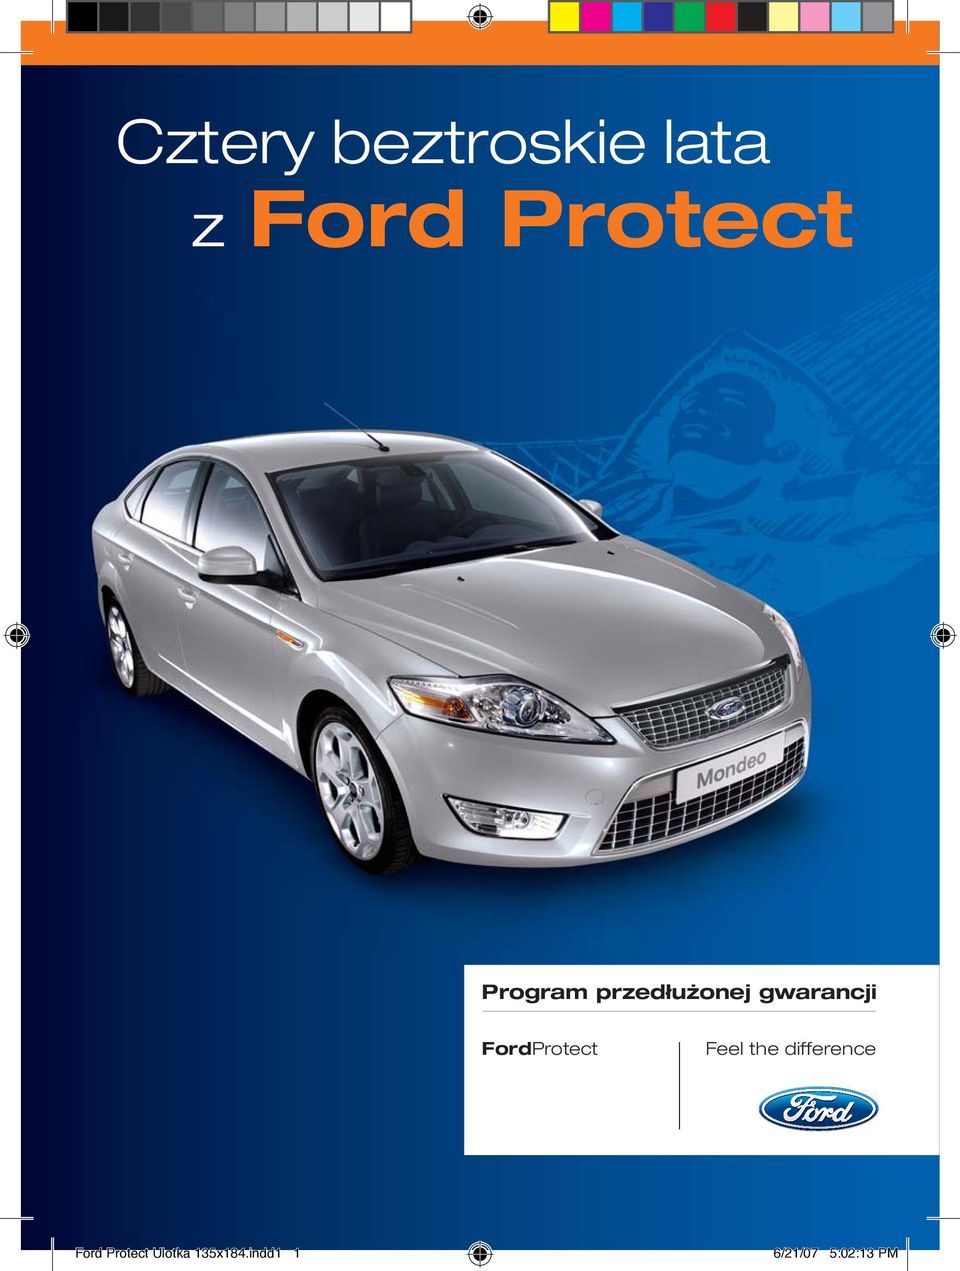 FordProtect Feel the difference Ford